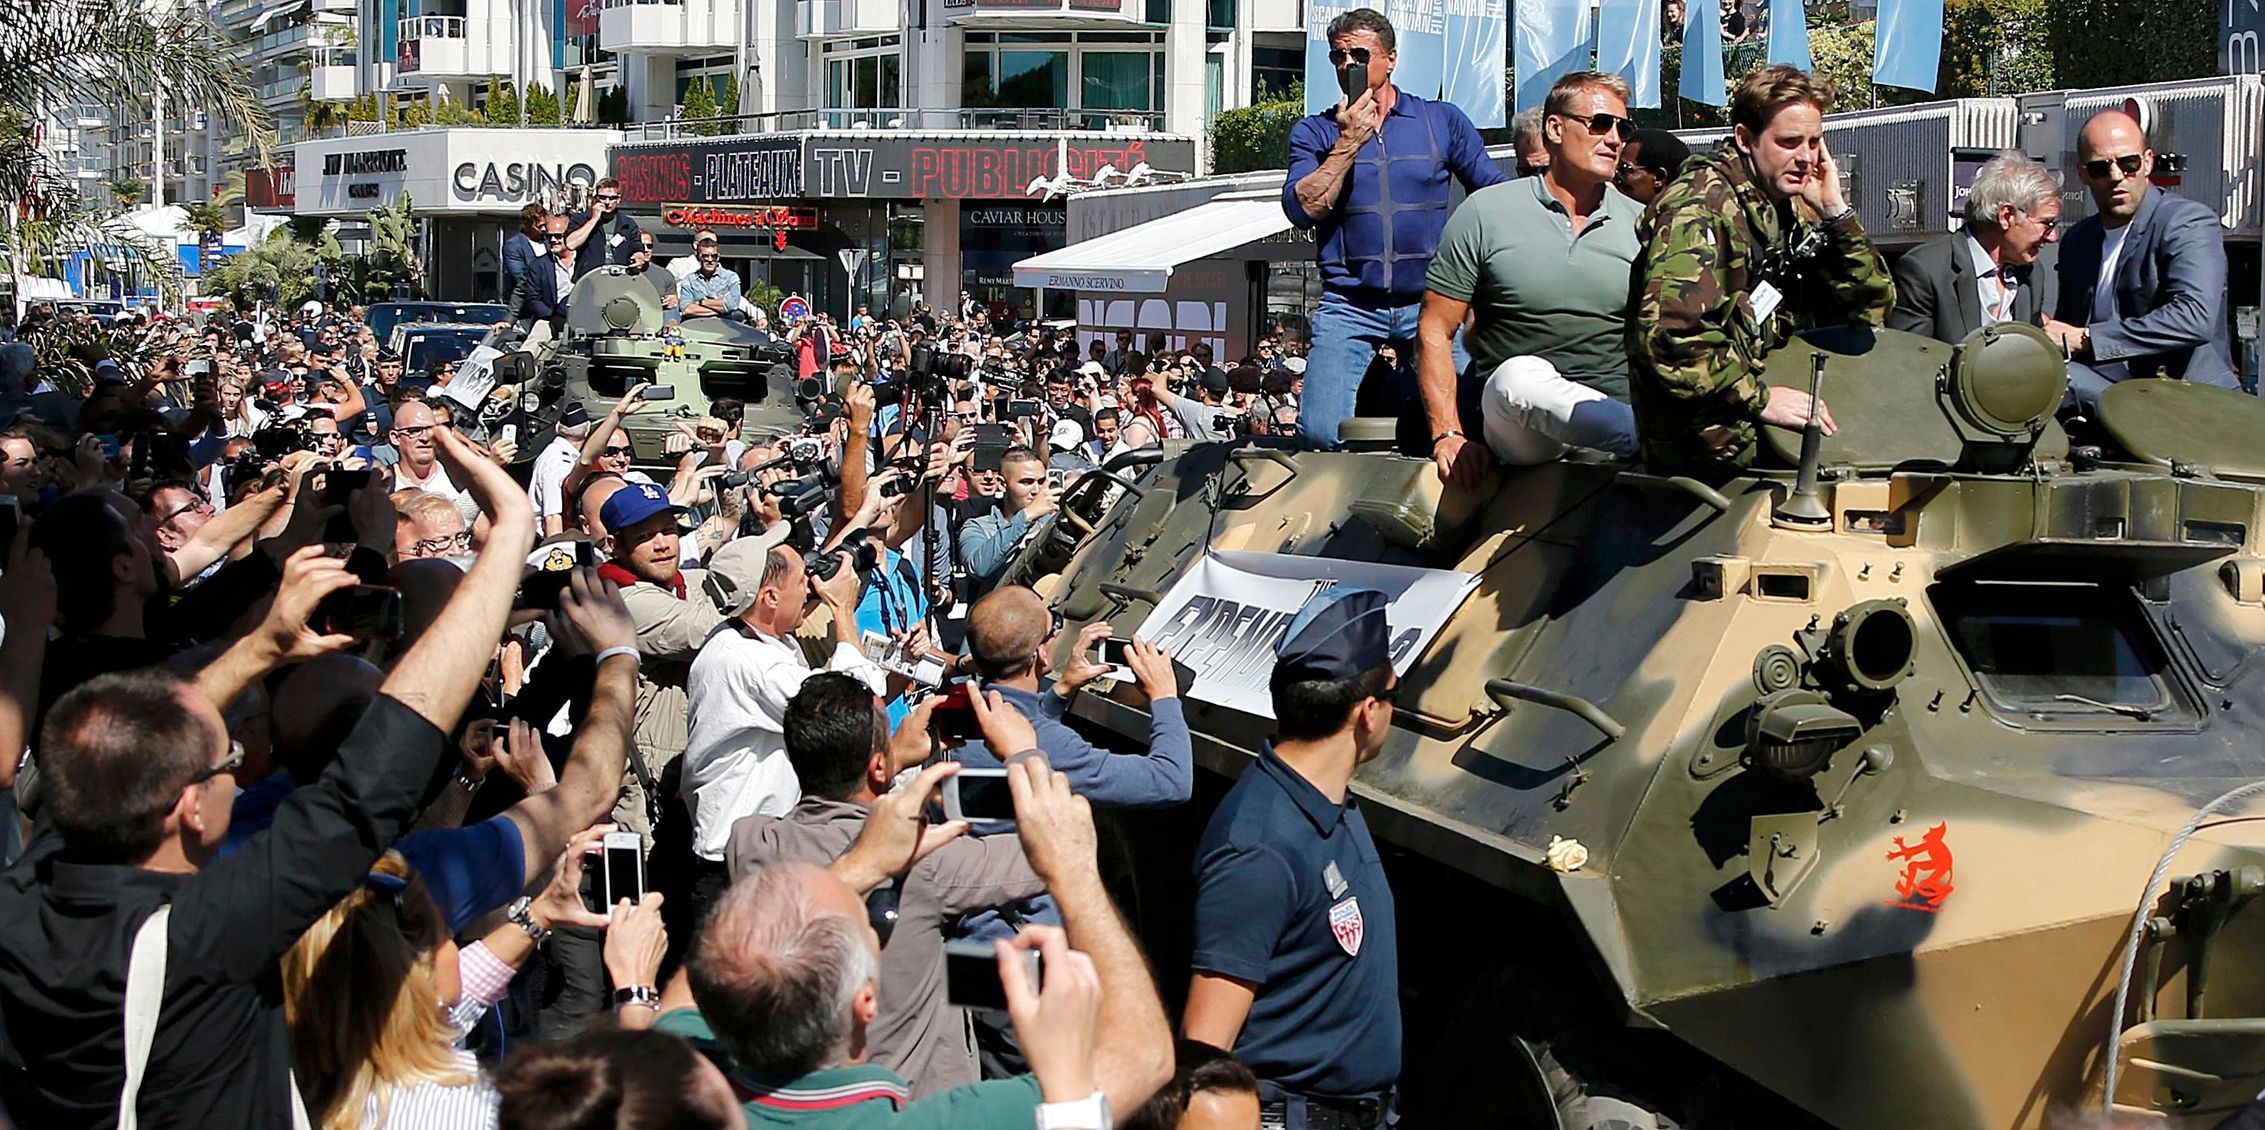 Cast members Sylvester Stallone, Dolph Lundgren, Harrison Ford and Jason Statham pose on a tank as they arrive on the Croisette to promote the film &quot;The Expendables 3&quot; during the 67th Cannes